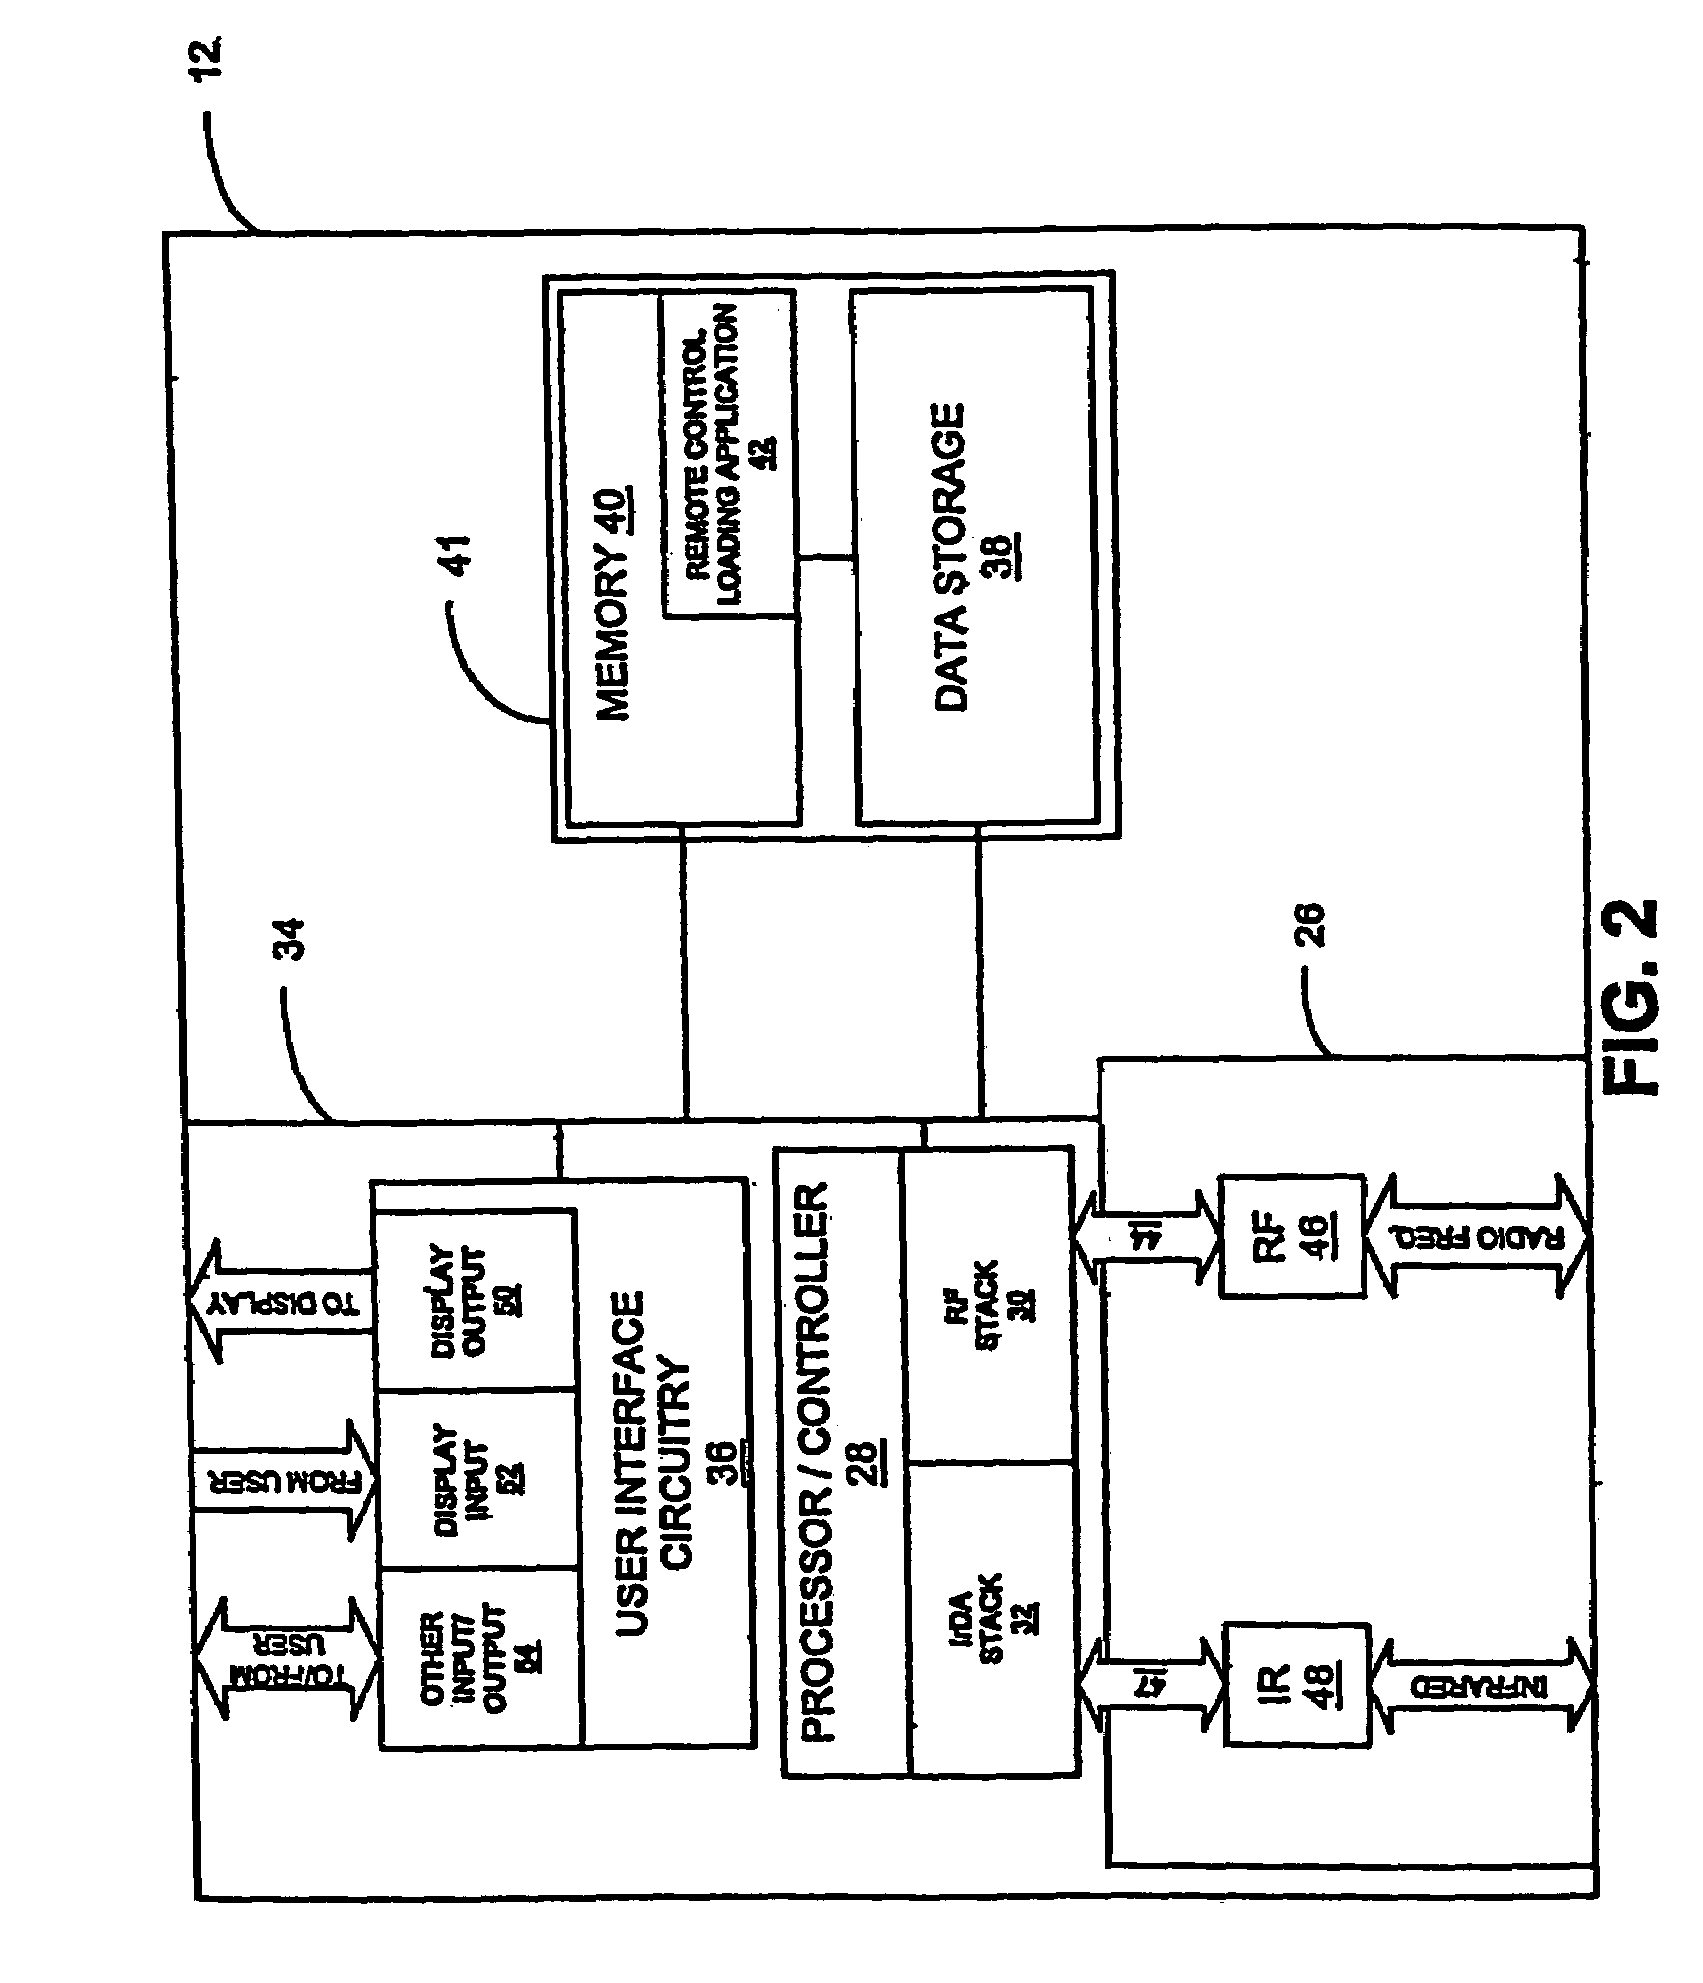 Method and system for wirelessly autodialing a telephone number from a record stored on a personal information device